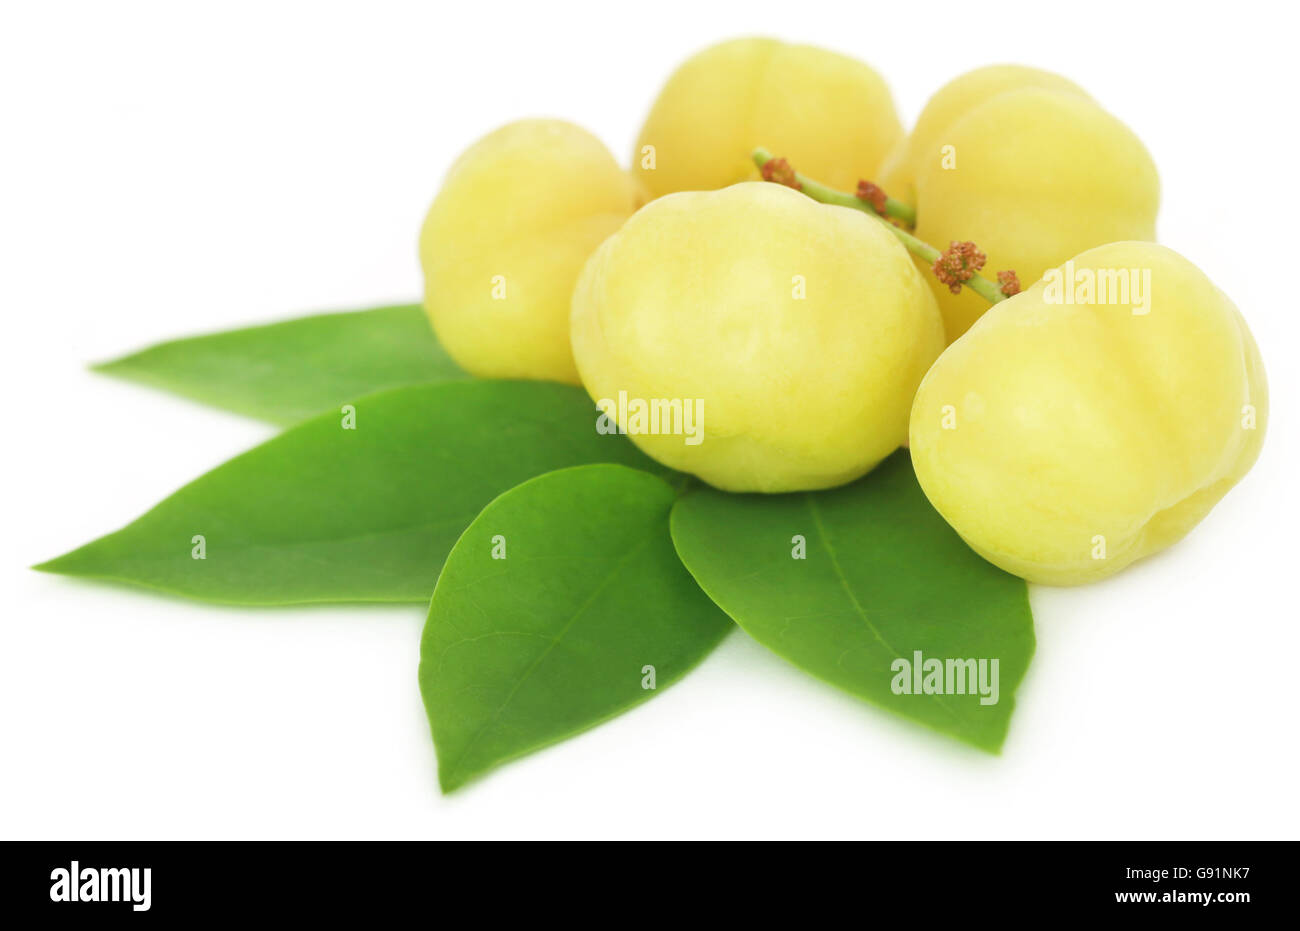 Phyllanthus acidus or Star gooseberry with green leaves Stock Photo